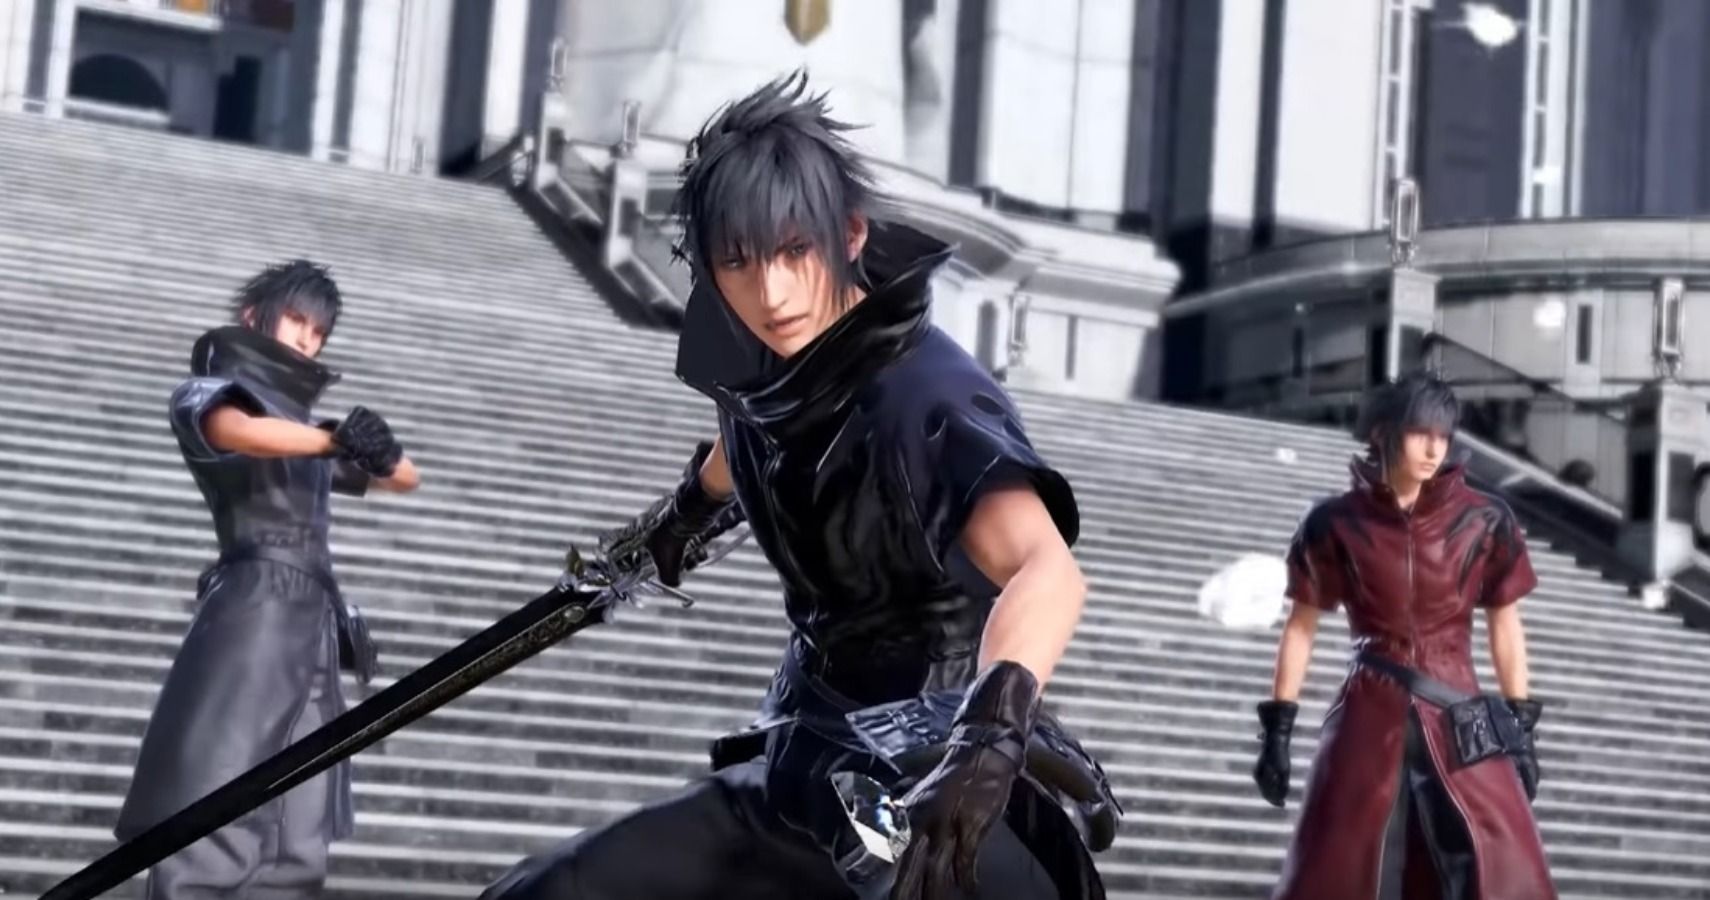 Final Fantasy Versus XIII Lives On As A Costume In Dissidia